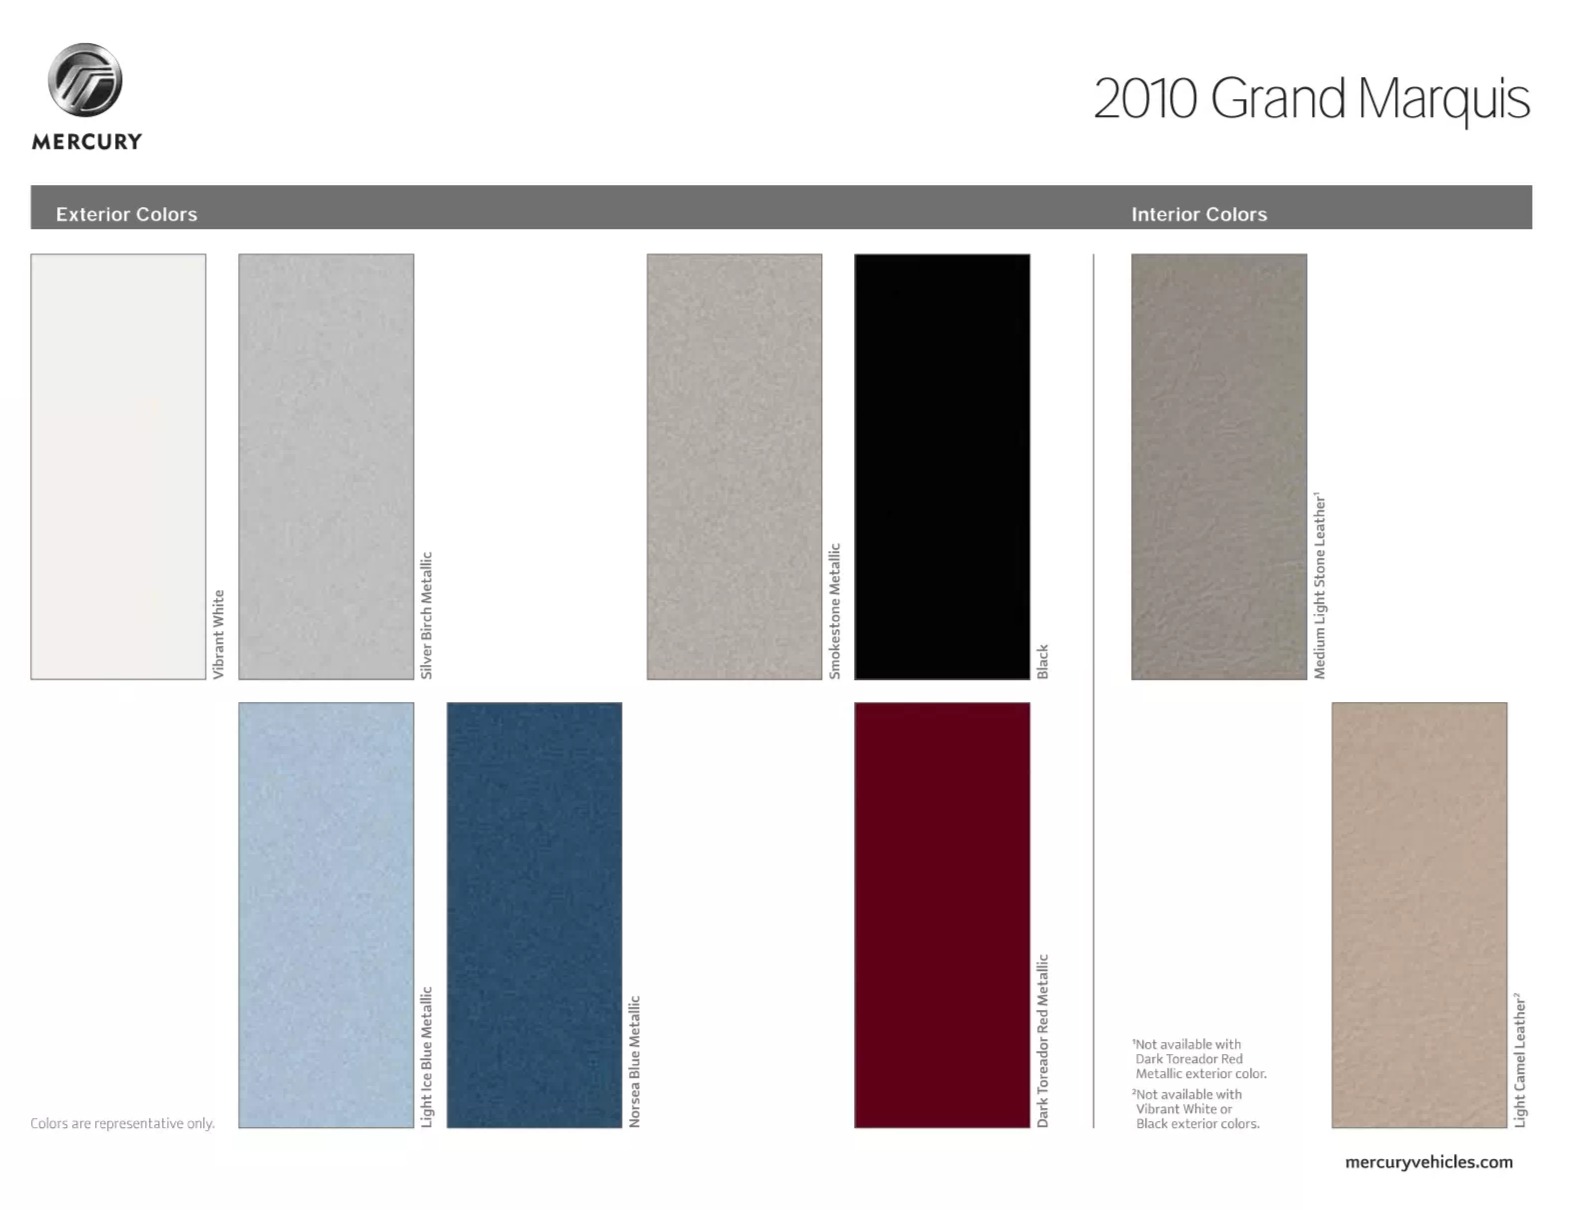 exterior color swatches showing what options were used on the 2010 Mercury Grand Marquis Vehicles